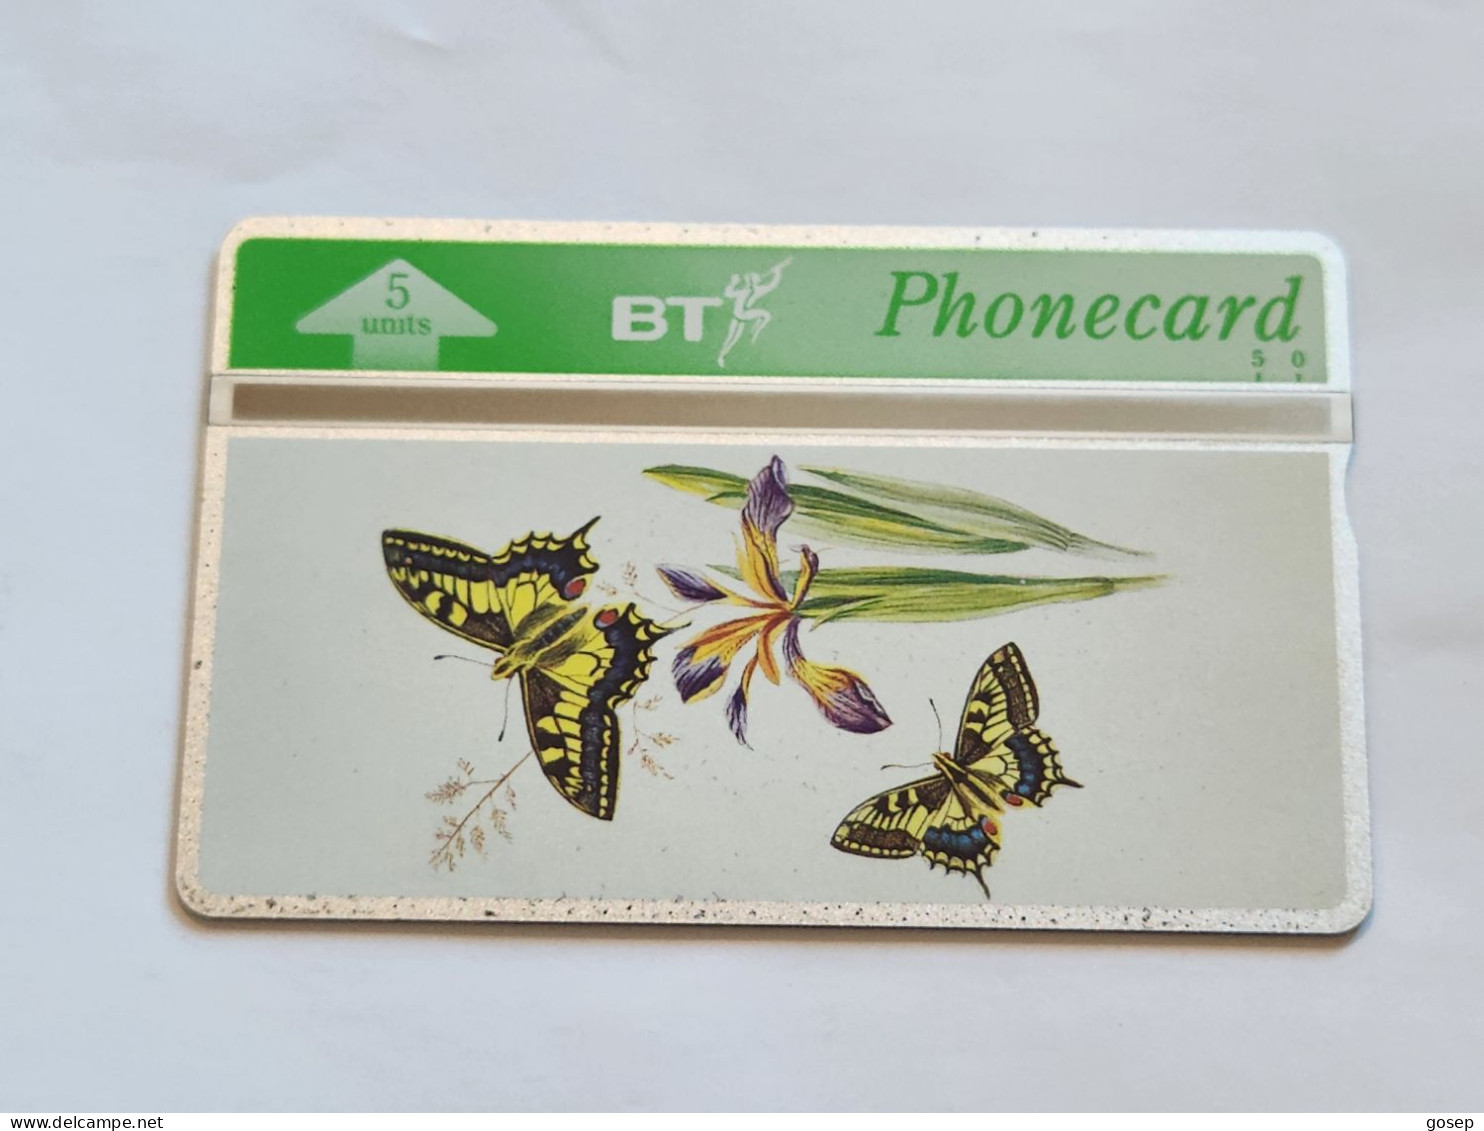 United Kingdom-(BTG-461)-Butterflies  & Flowers-(2)-(392)(5units)(430A09598)(tirage-5.001)-price Cataloge-25.00£-mint - BT General Issues